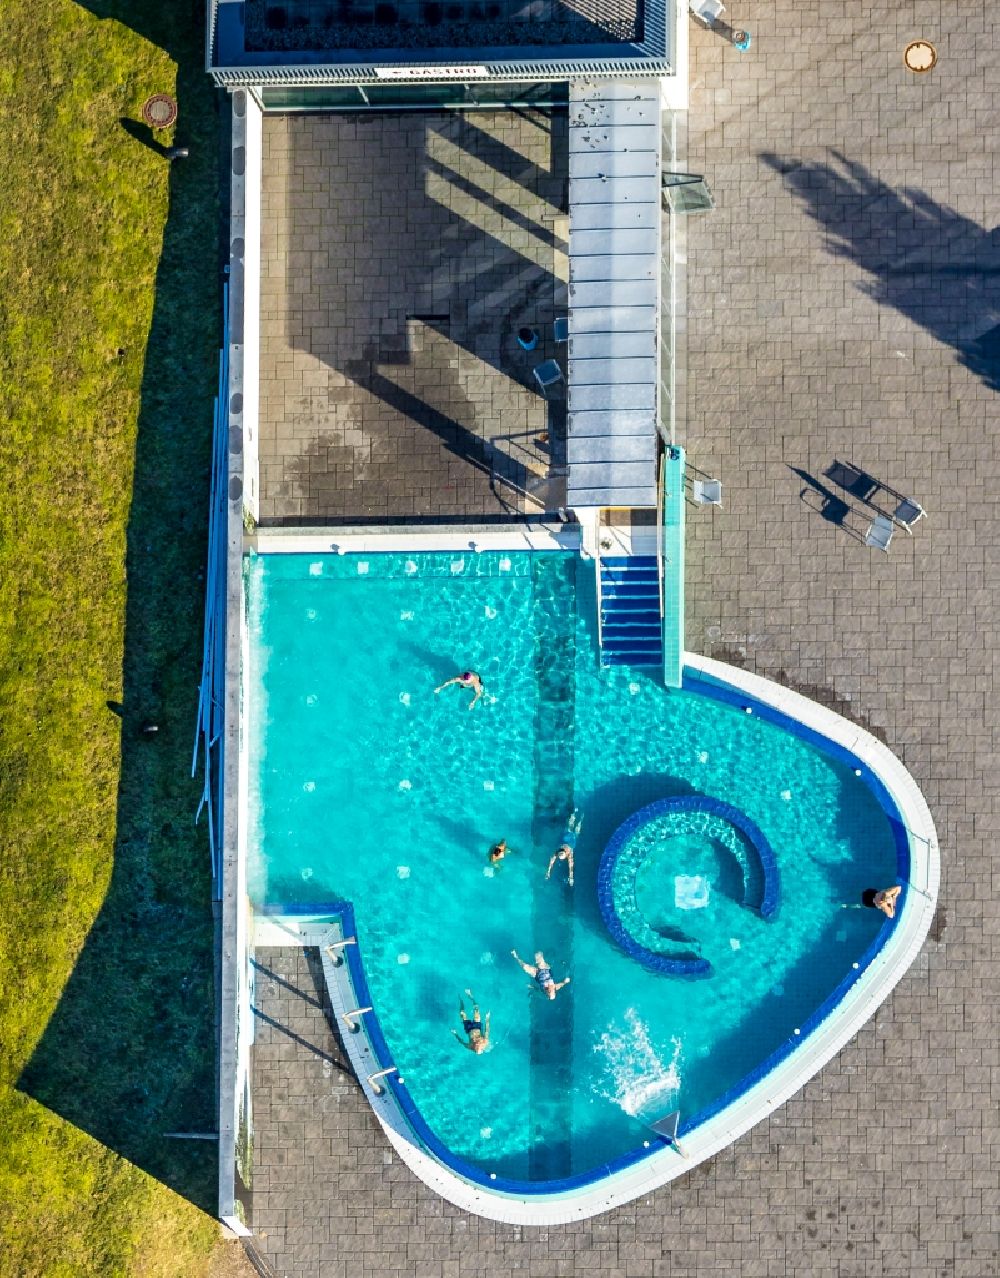 Vertical aerial photograph Hagen - Vertical aerial view from the satellite perspective of the spa and swimming pools at the swimming pool of the leisure facility WESTFALENBAD on Stadionstrasse in Hagen in the state North Rhine-Westphalia, Germany